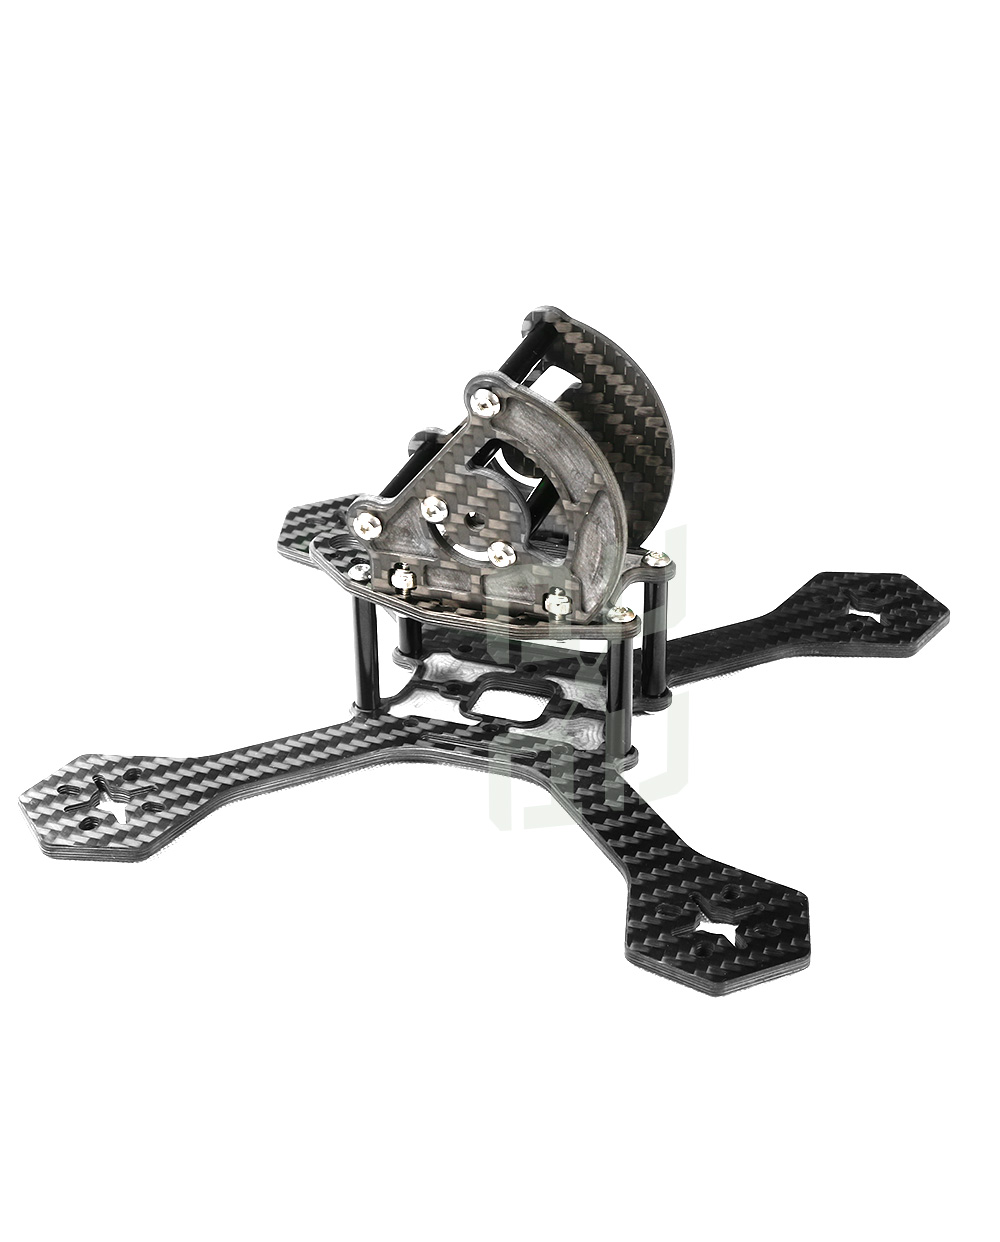 QQ166 4" Racing Drone X-style frame available from QuadQuestions.com right side